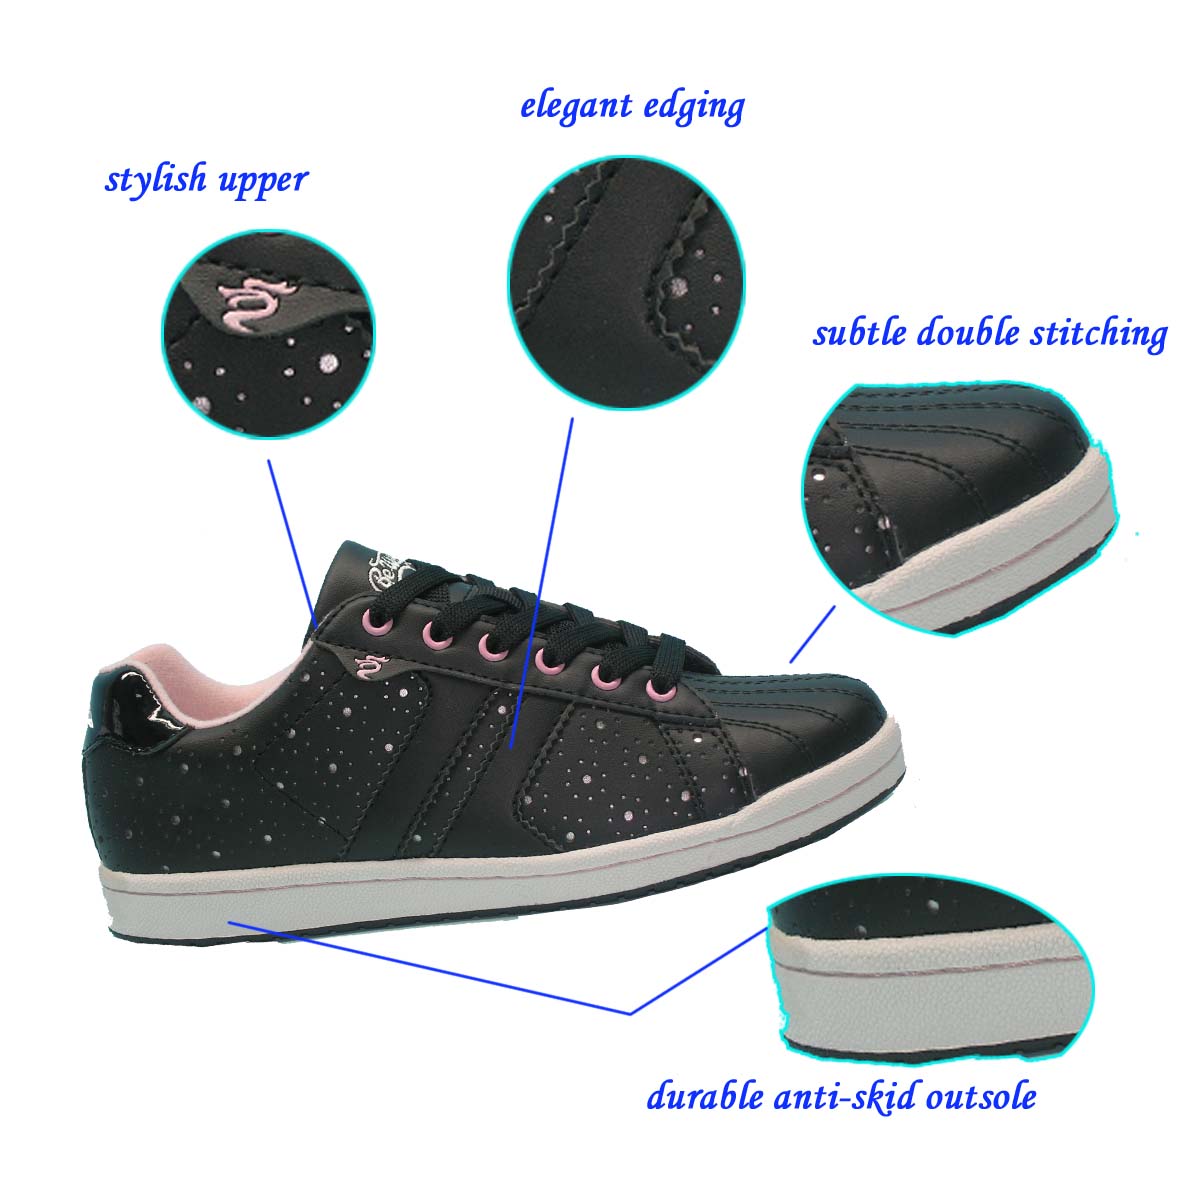 Best Selling Graceful Black Hollow Out Skate Shoes with Breathable Upper for Woman